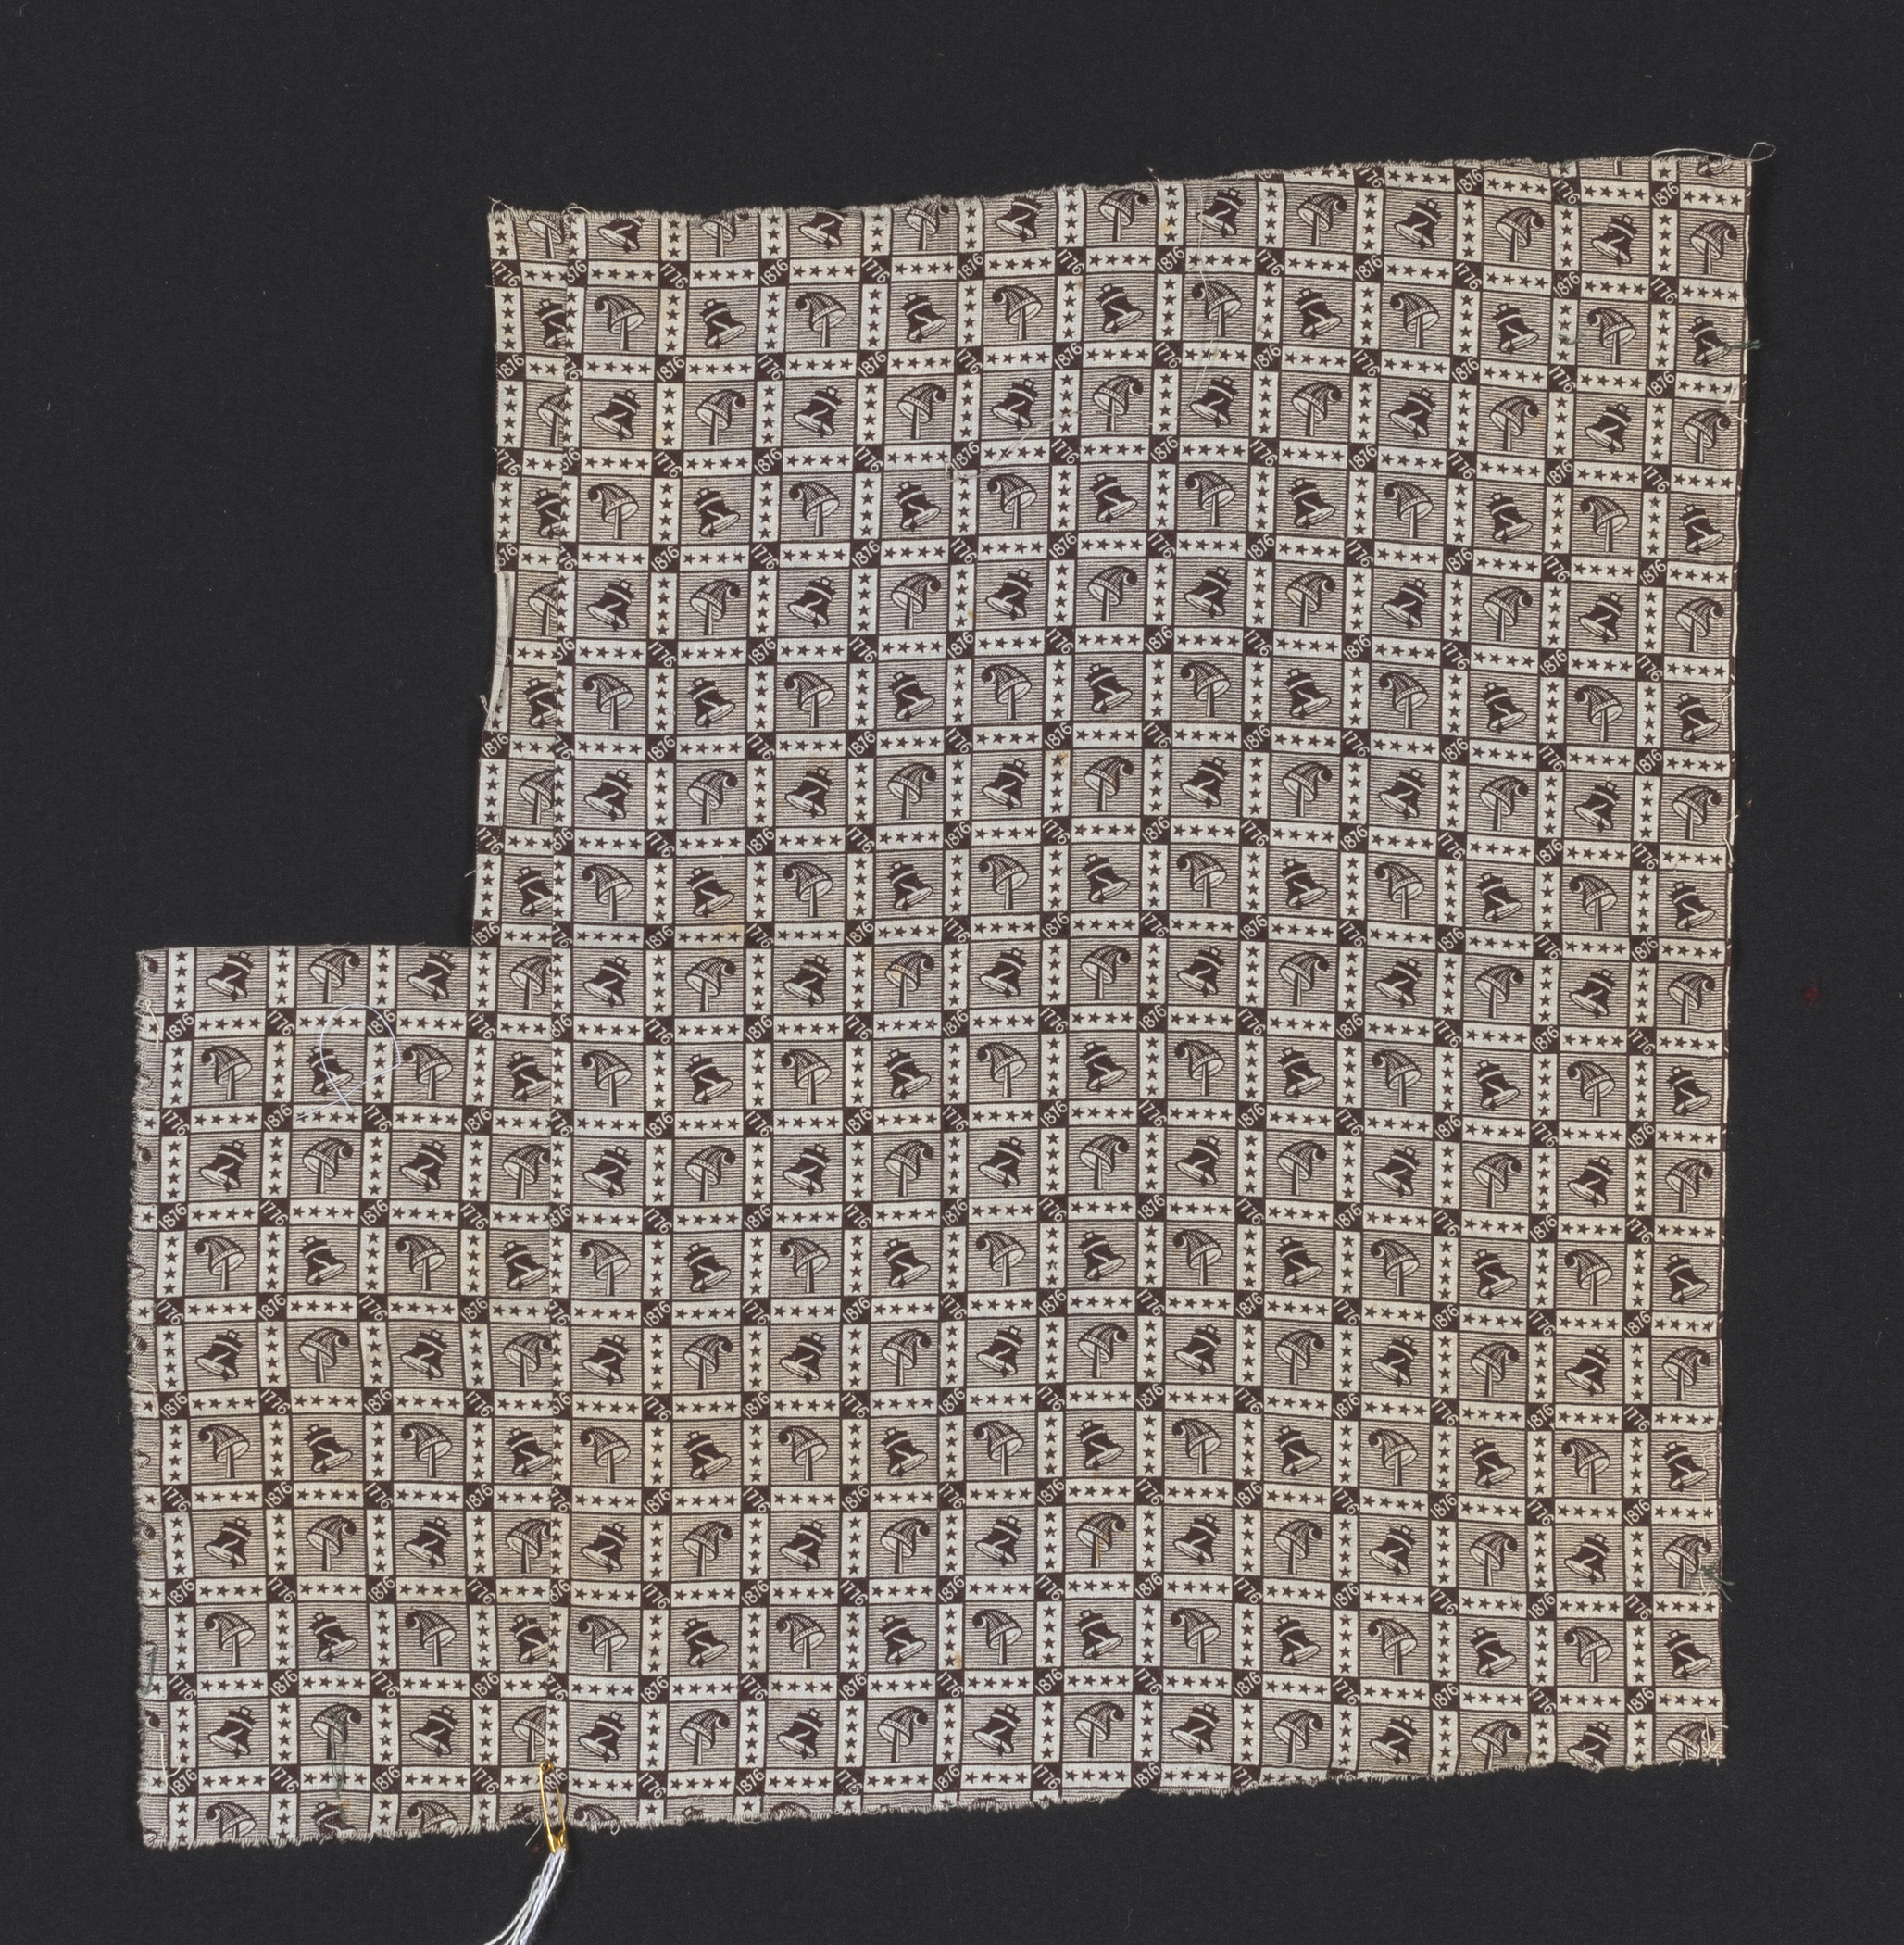 2018.0010.019.002 Textile fragment, printed, view 1